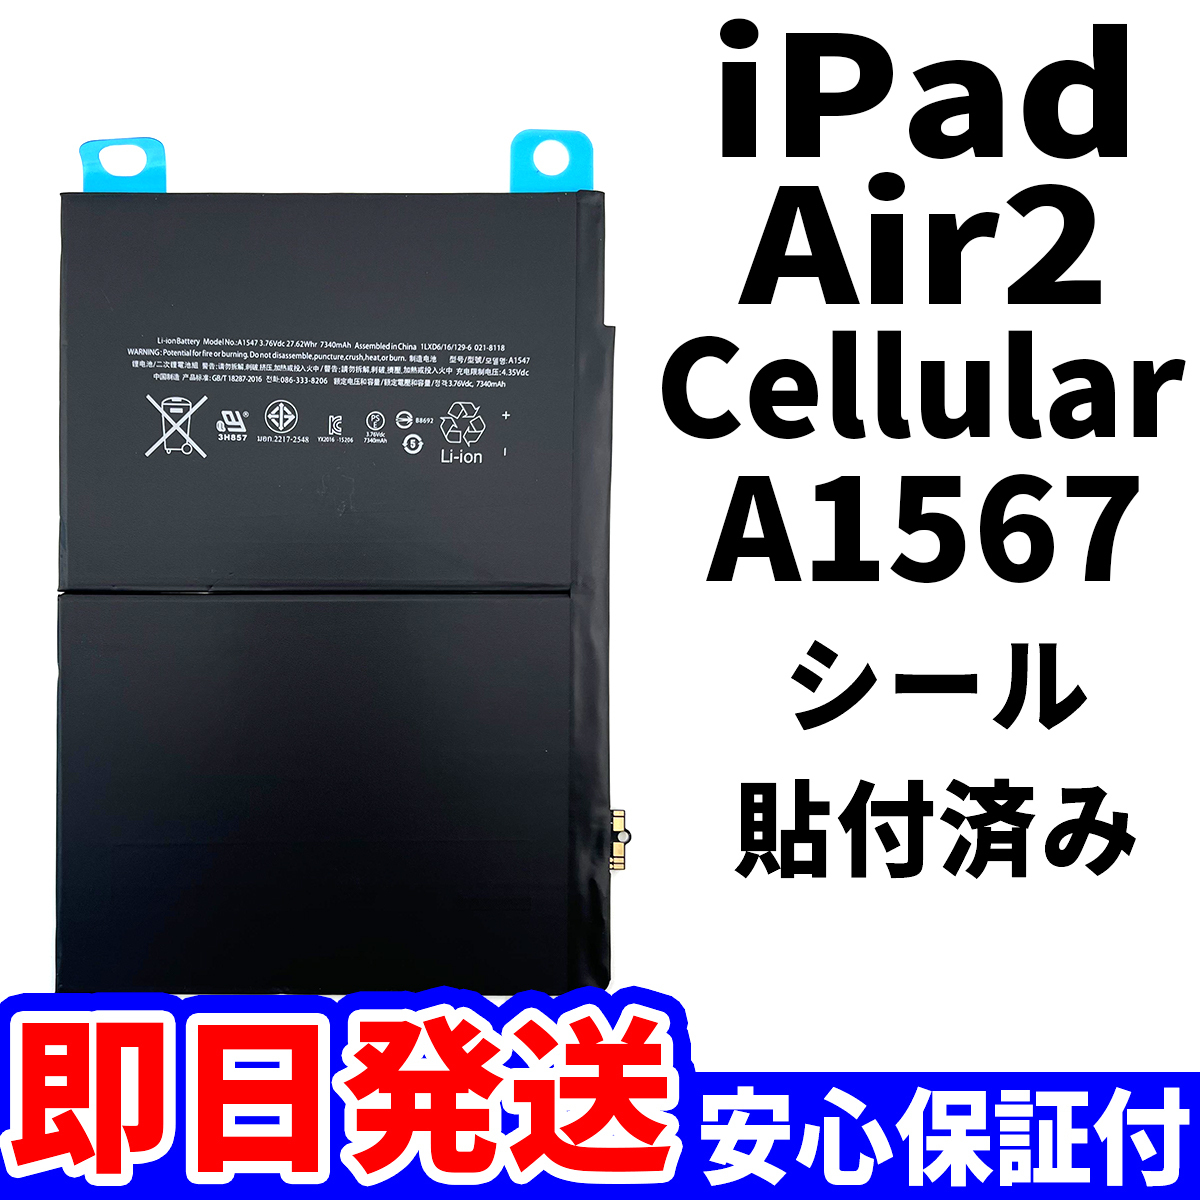  domestic same day shipping! original same etc. new goods!iPad Air2 battery A1567 battery pack exchange Cellular cell la- high quality internal organs battery tool less battery single goods 